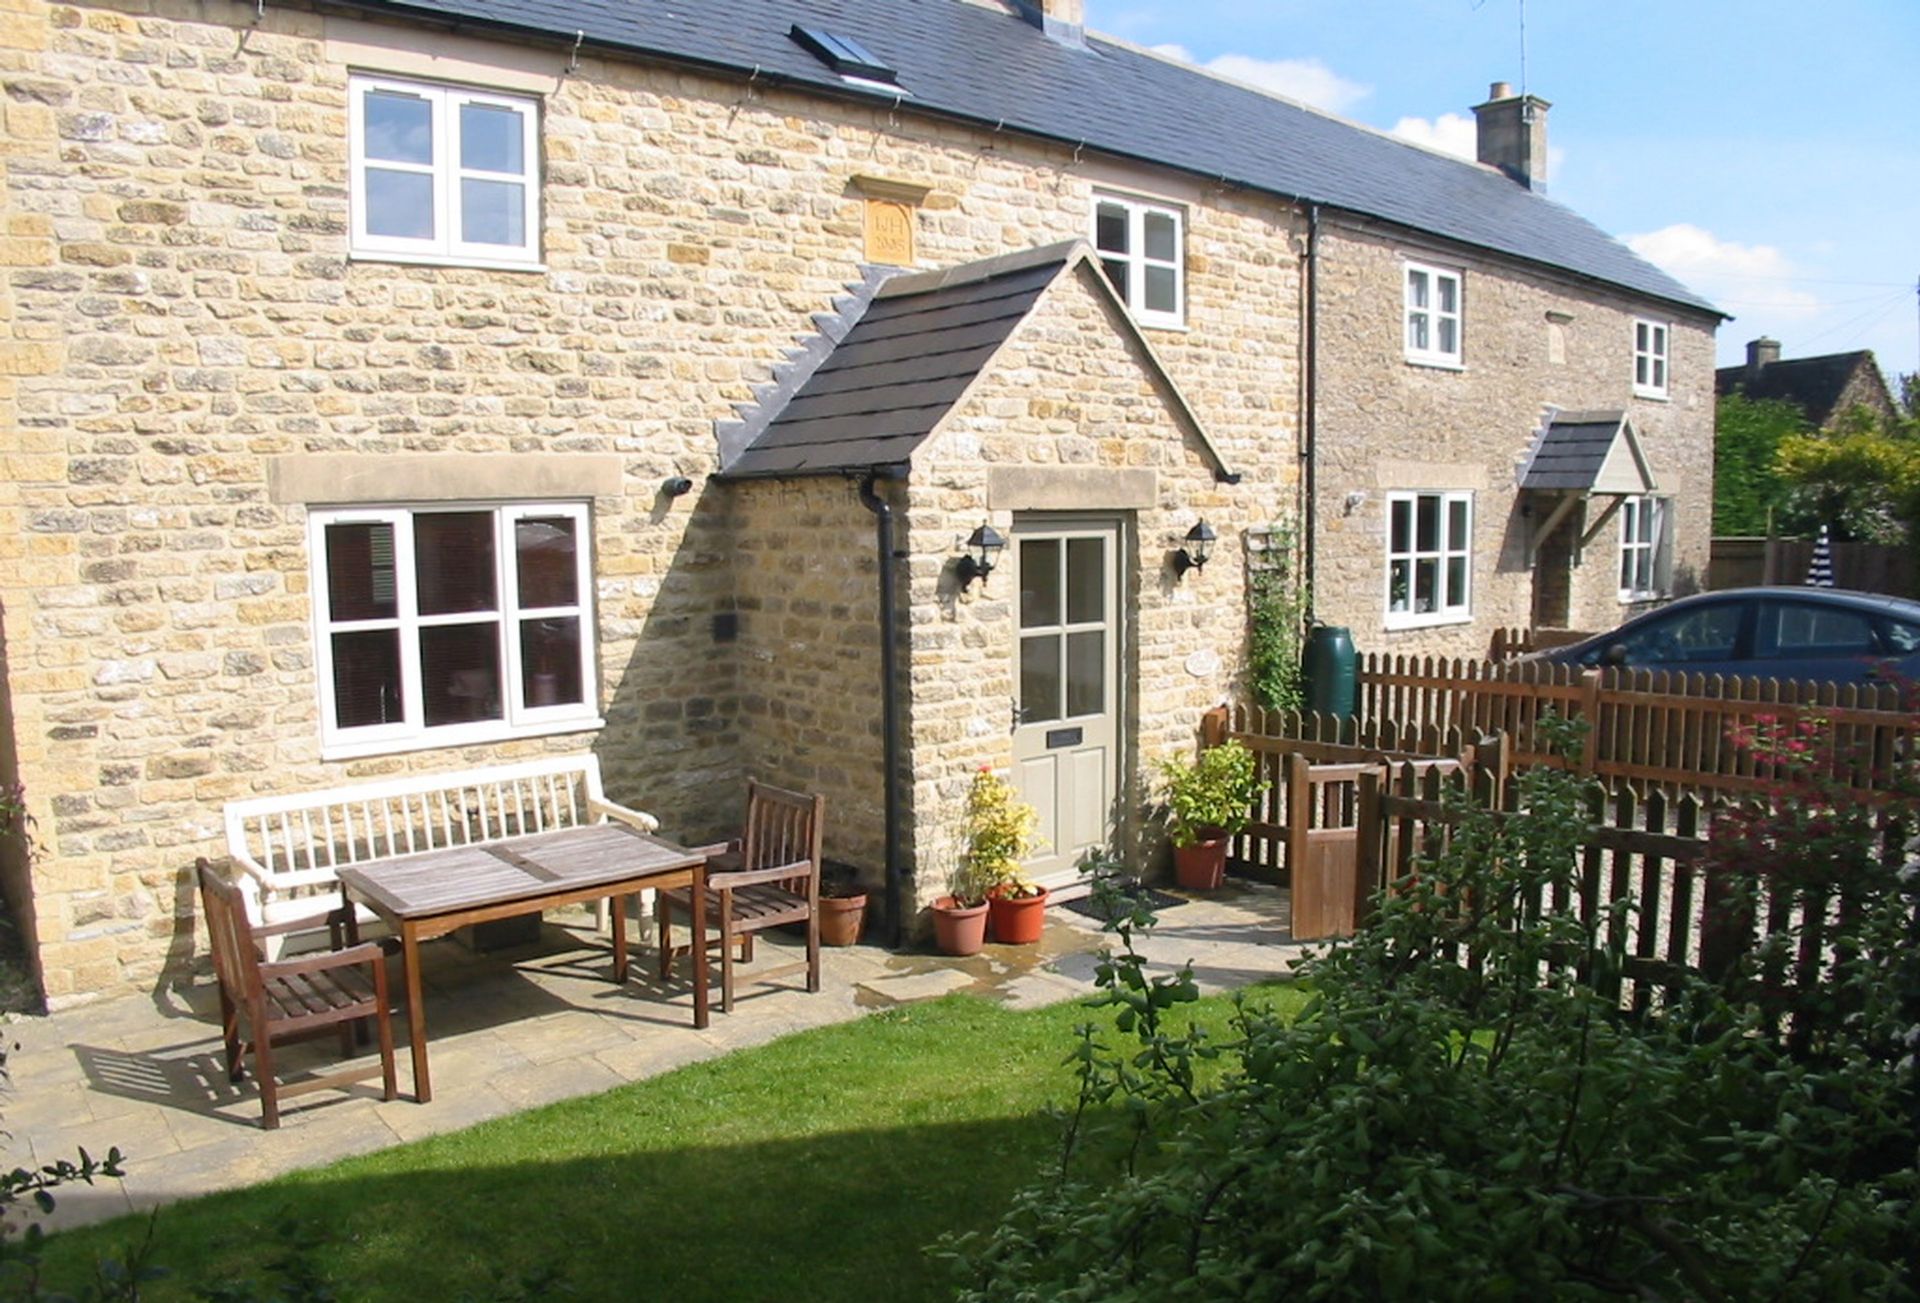 Devon House Cottage is located in Stow-on-the-Wold